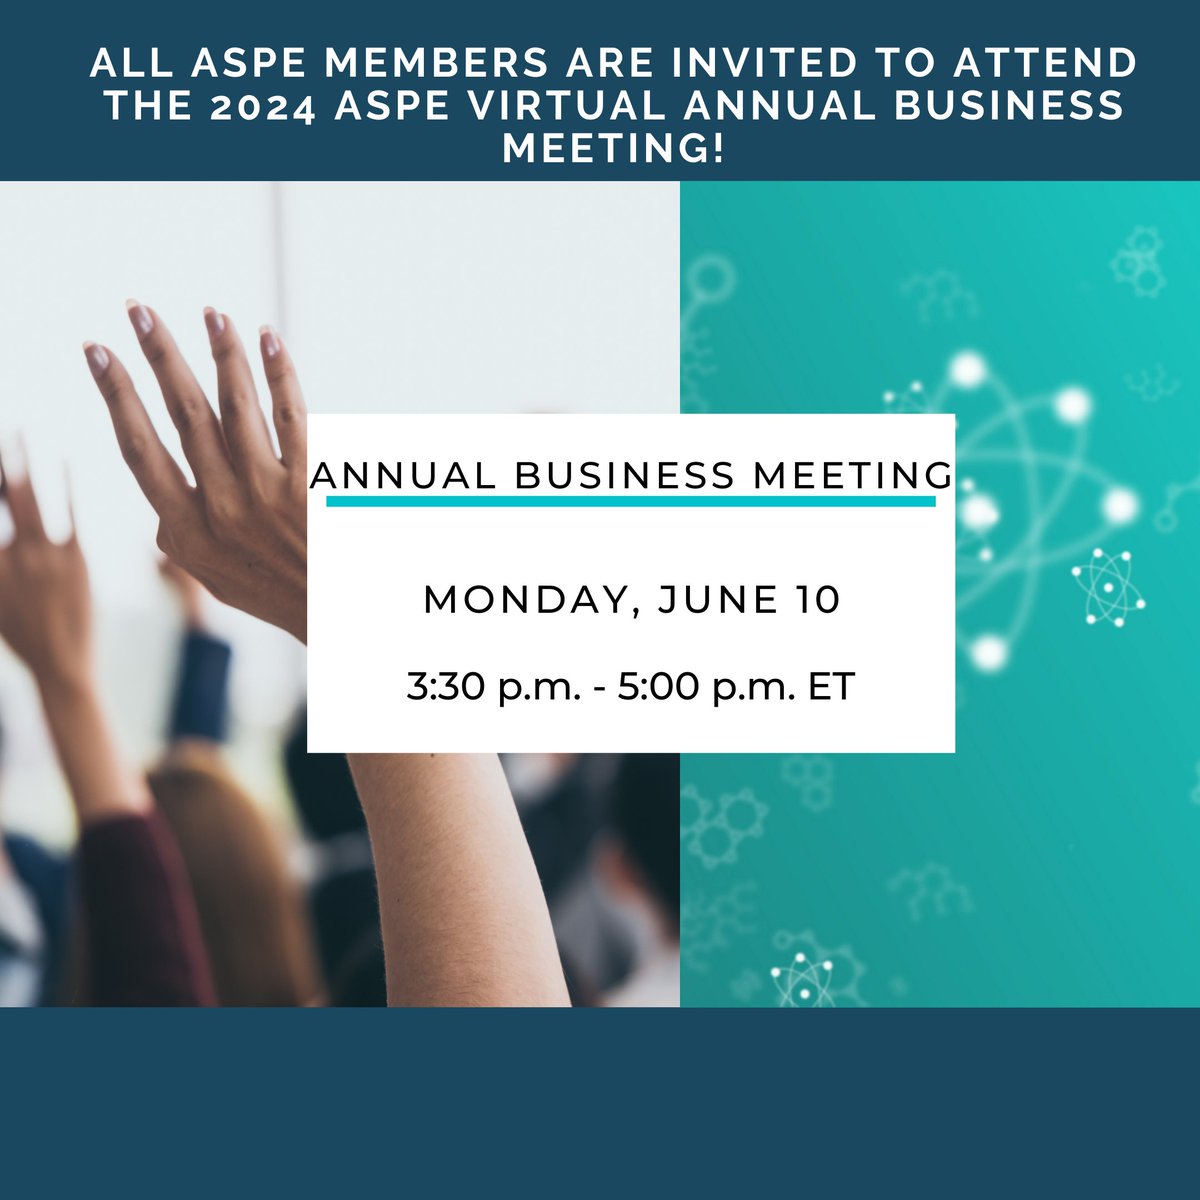 SAVE THE DATE! All ASPE members are invited to attend the 2024 ASPE Virtual Annual Business Meeting on Monday, June 10th at 3:30 PM - 5:00 PM ET.